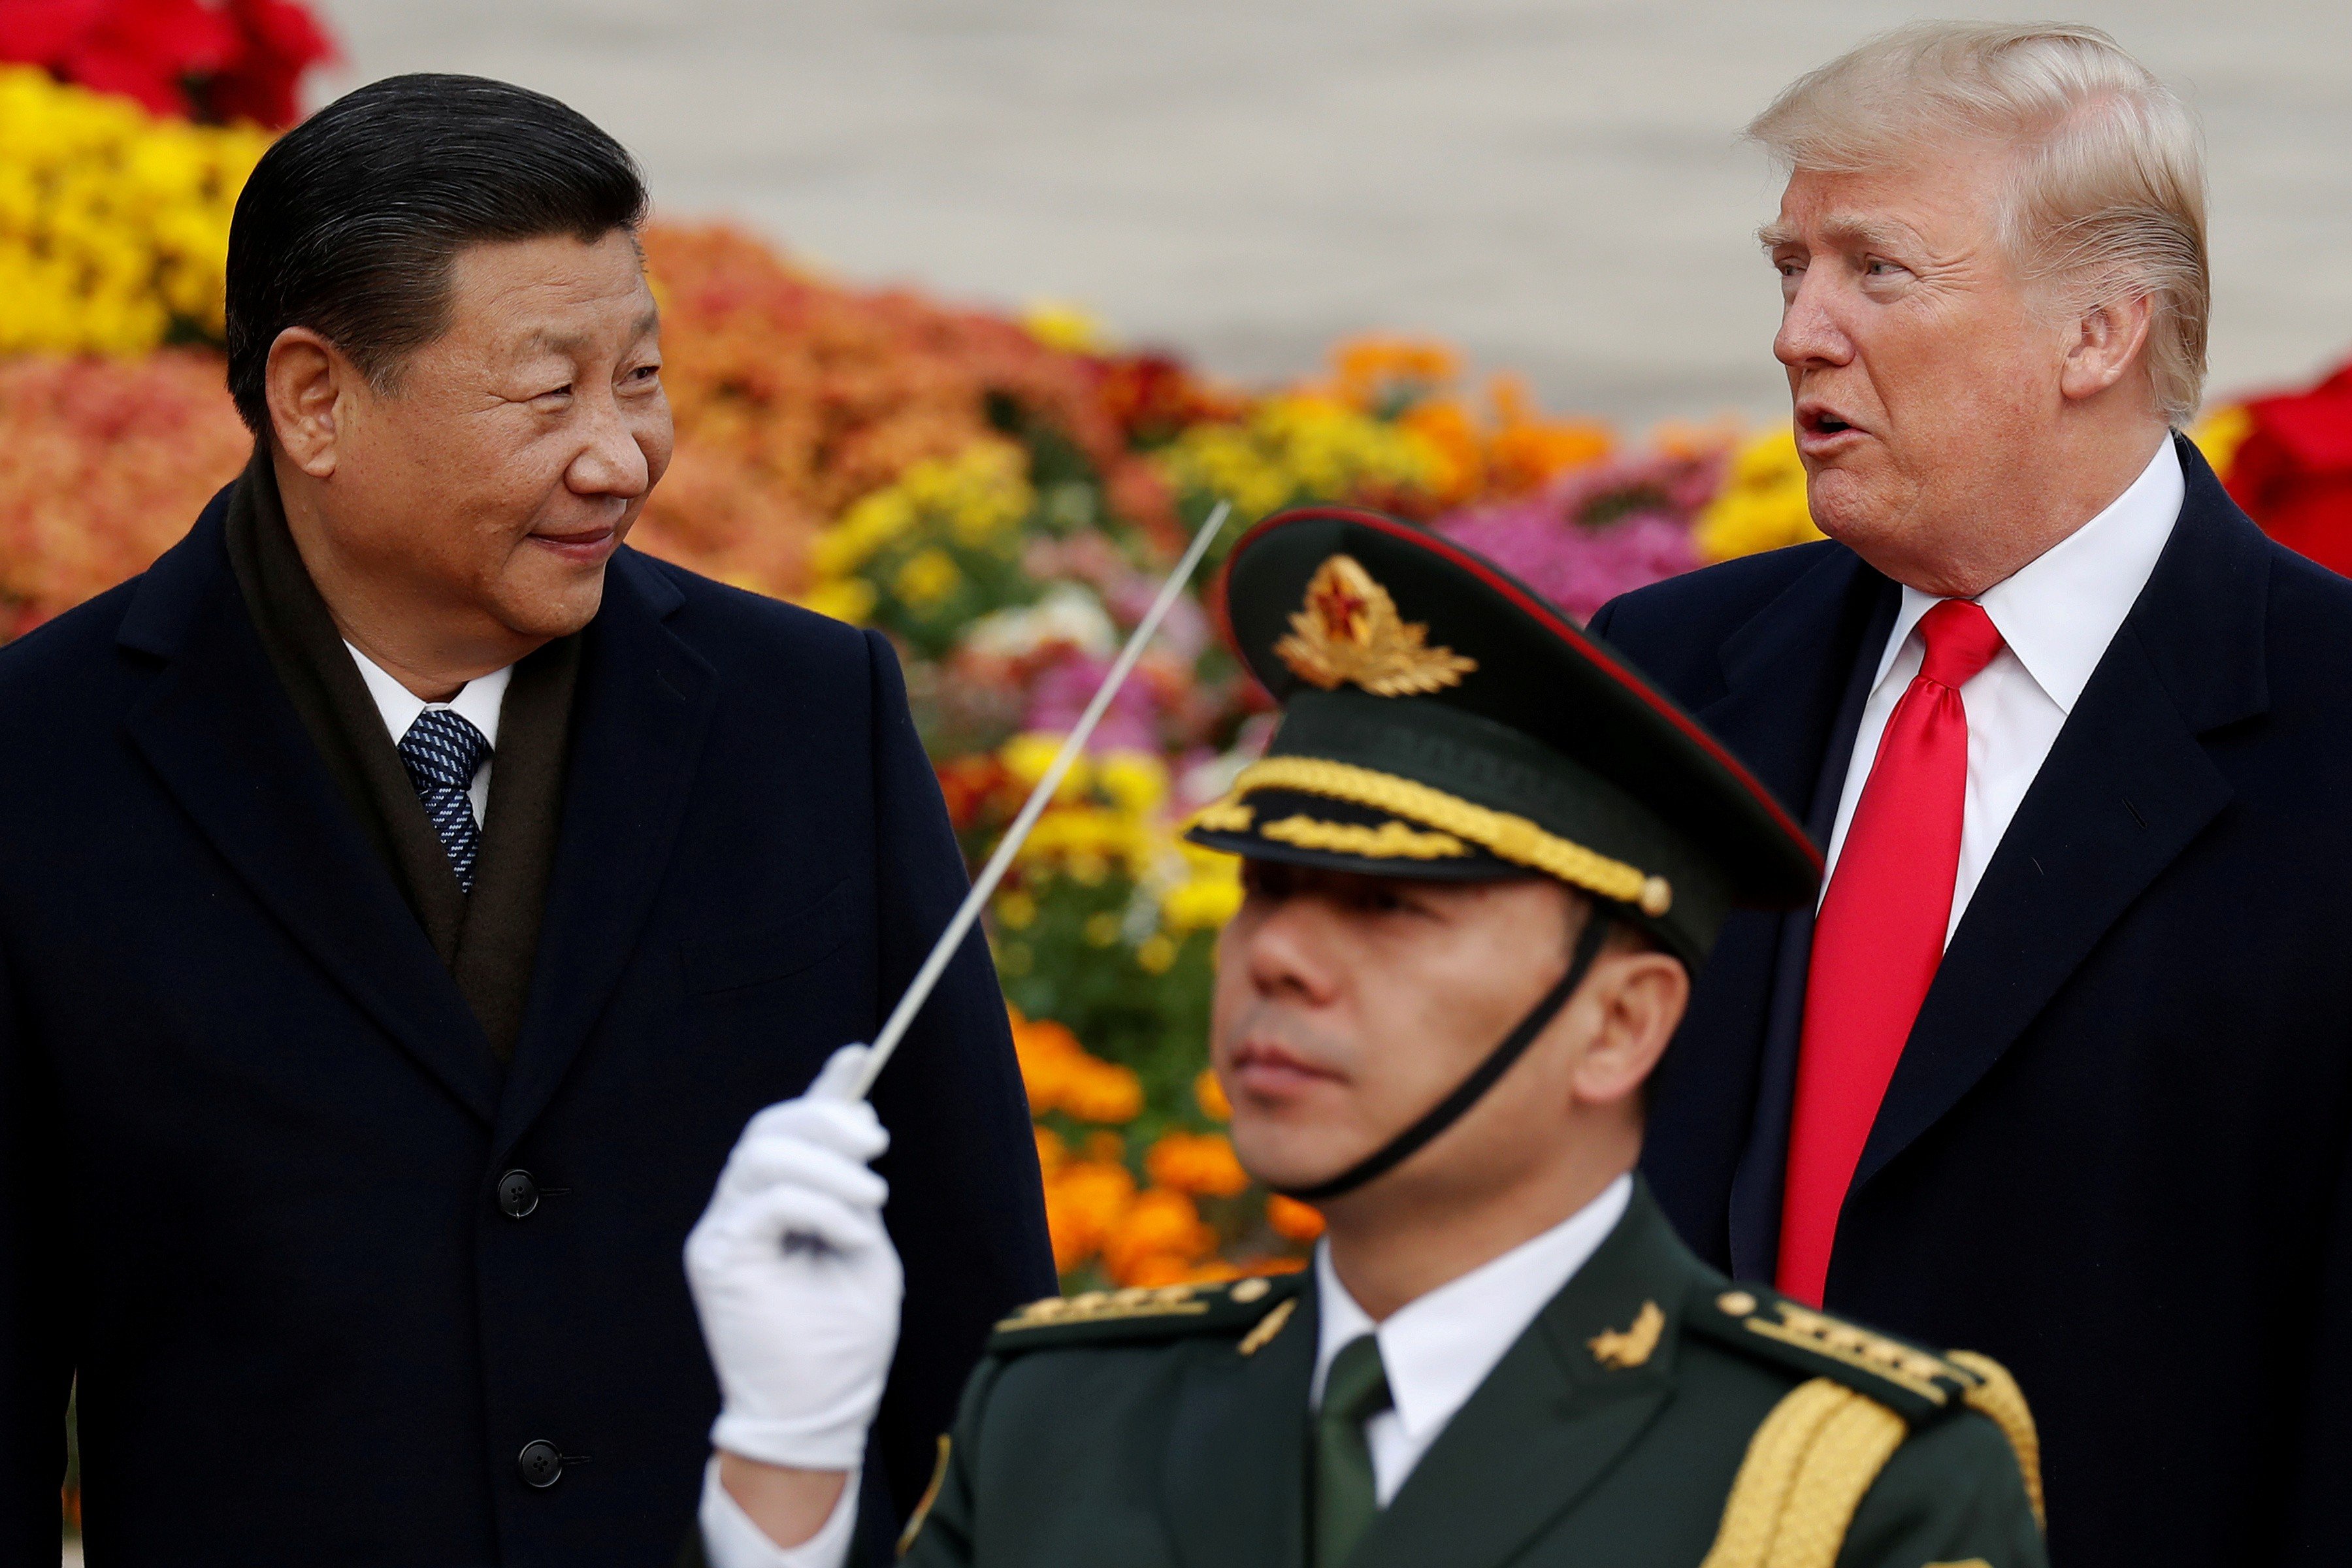 Chinese President Xi Jinping and US President Donald Trump taking part in a welcome ceremony at the Great Hall of the People in Beijing, in 2017. Photo: Reuters